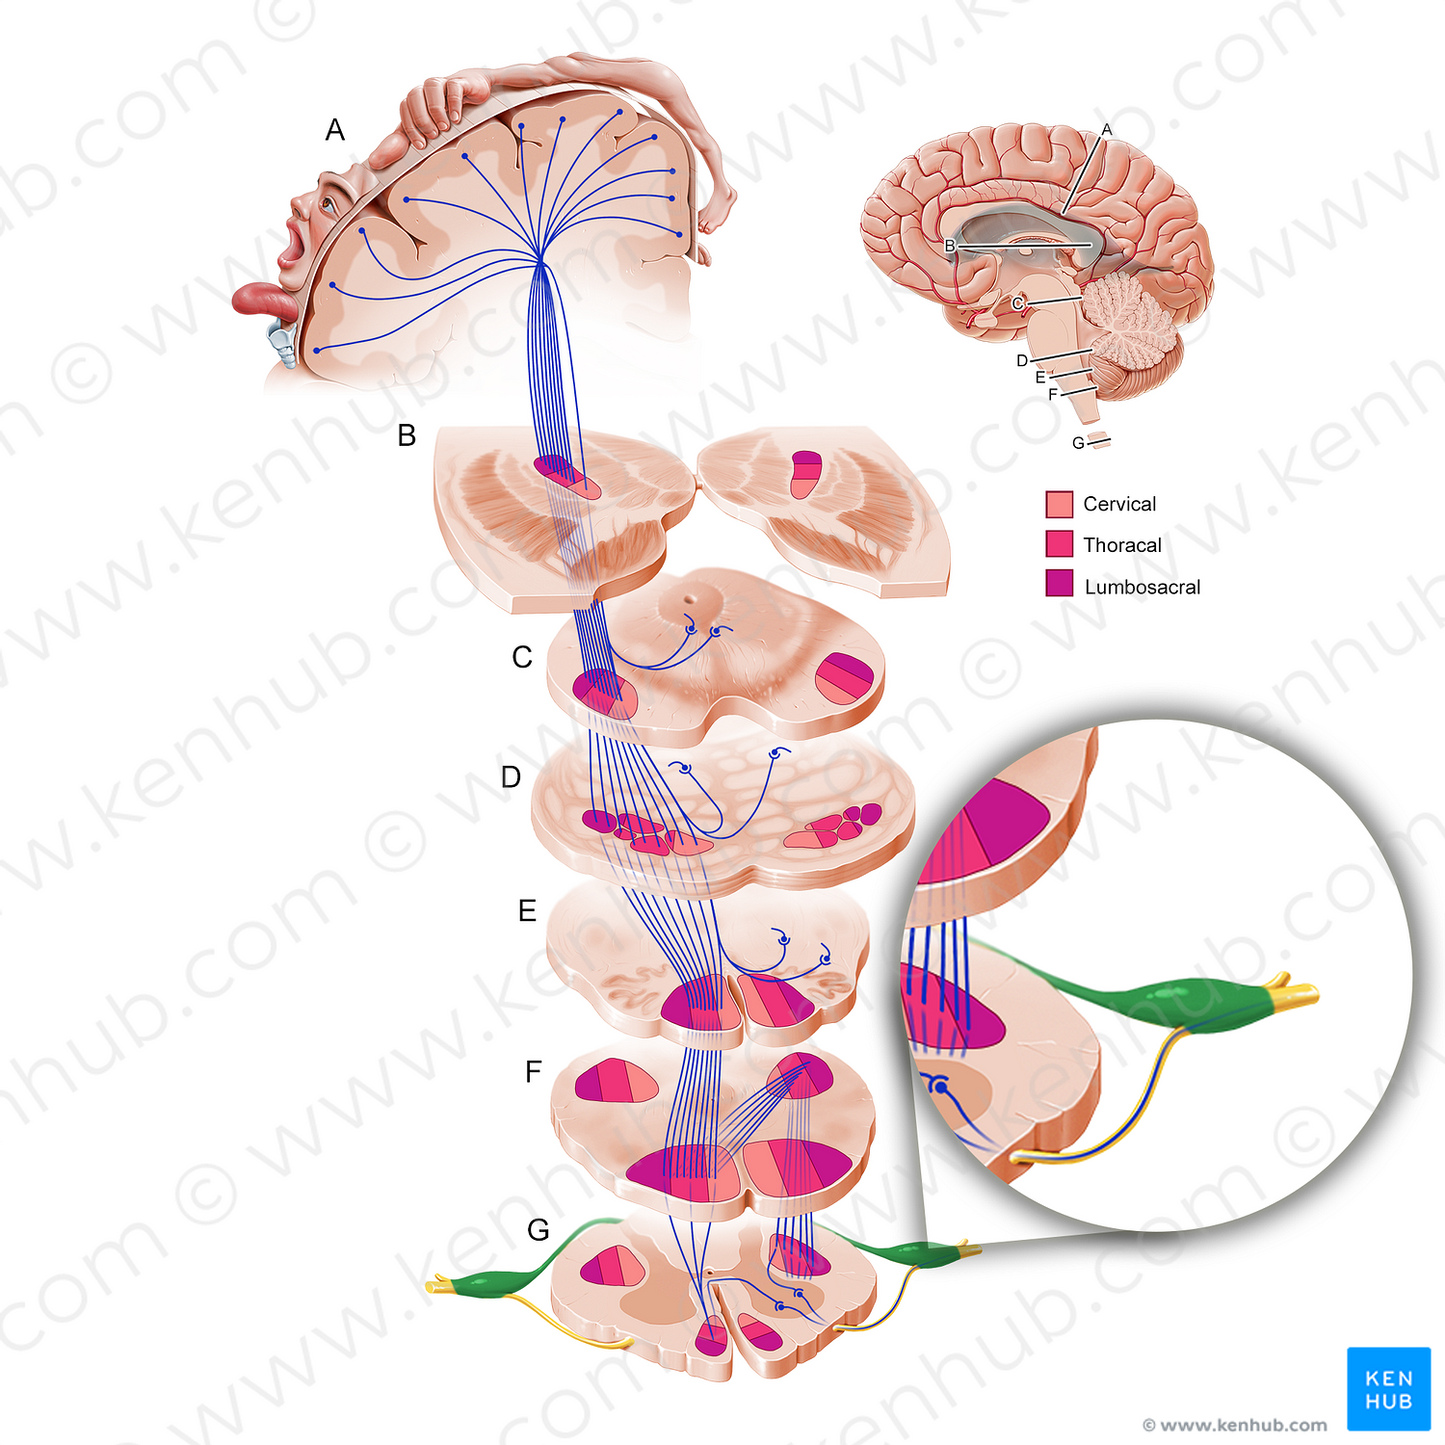 Posterior root of spinal nerve (#11222)